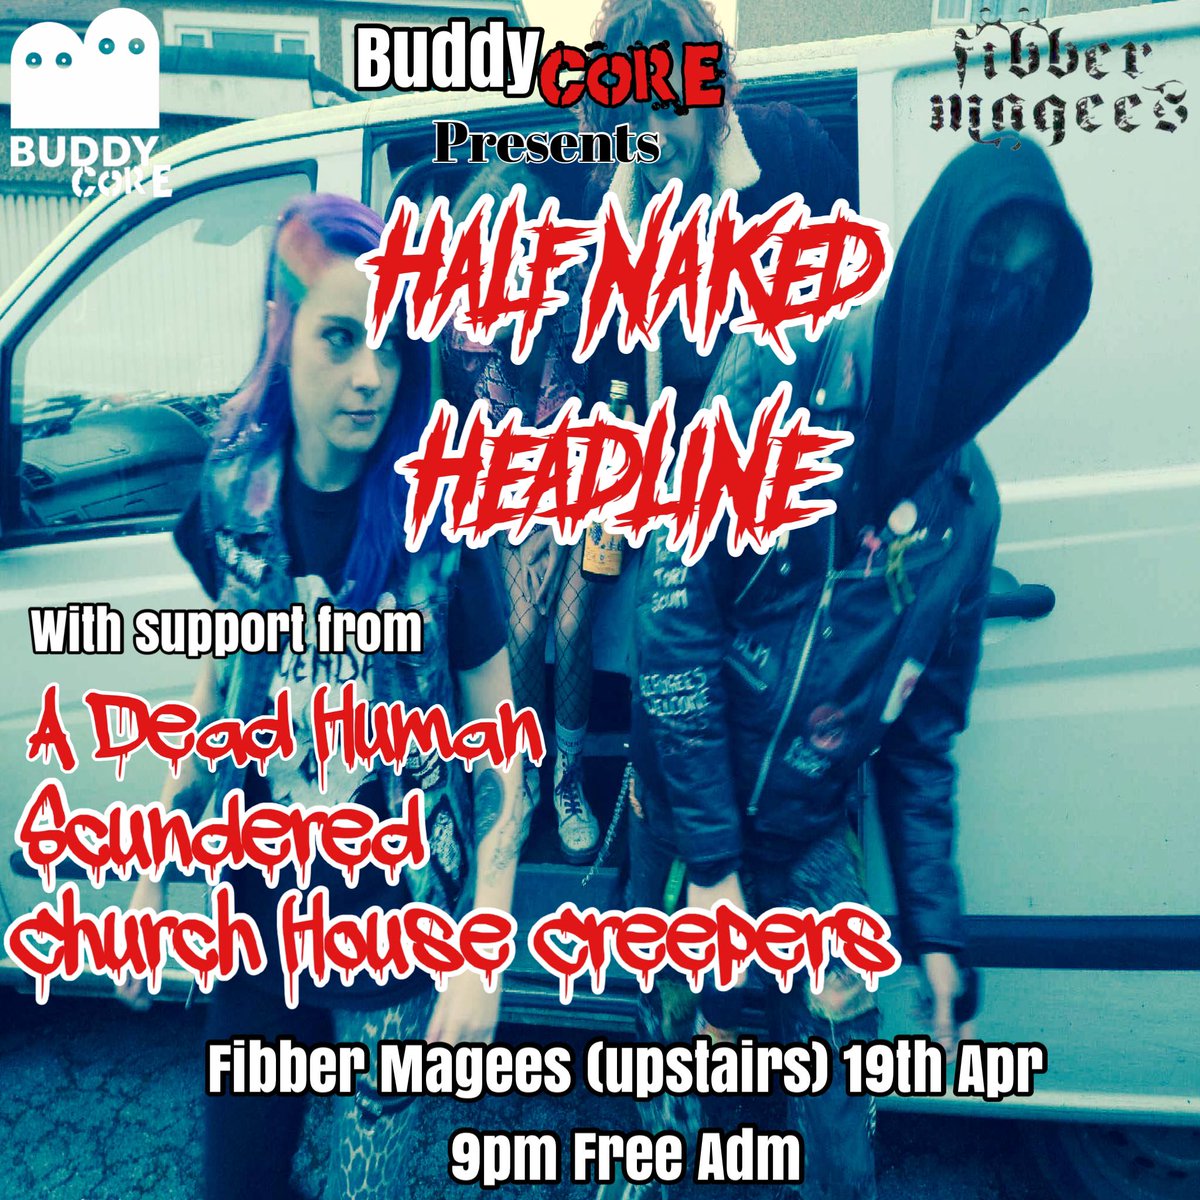 Friday : Buddycore presents - Half Naked Headline , A Dead Human , Scundered , Church House Creepers , free admission